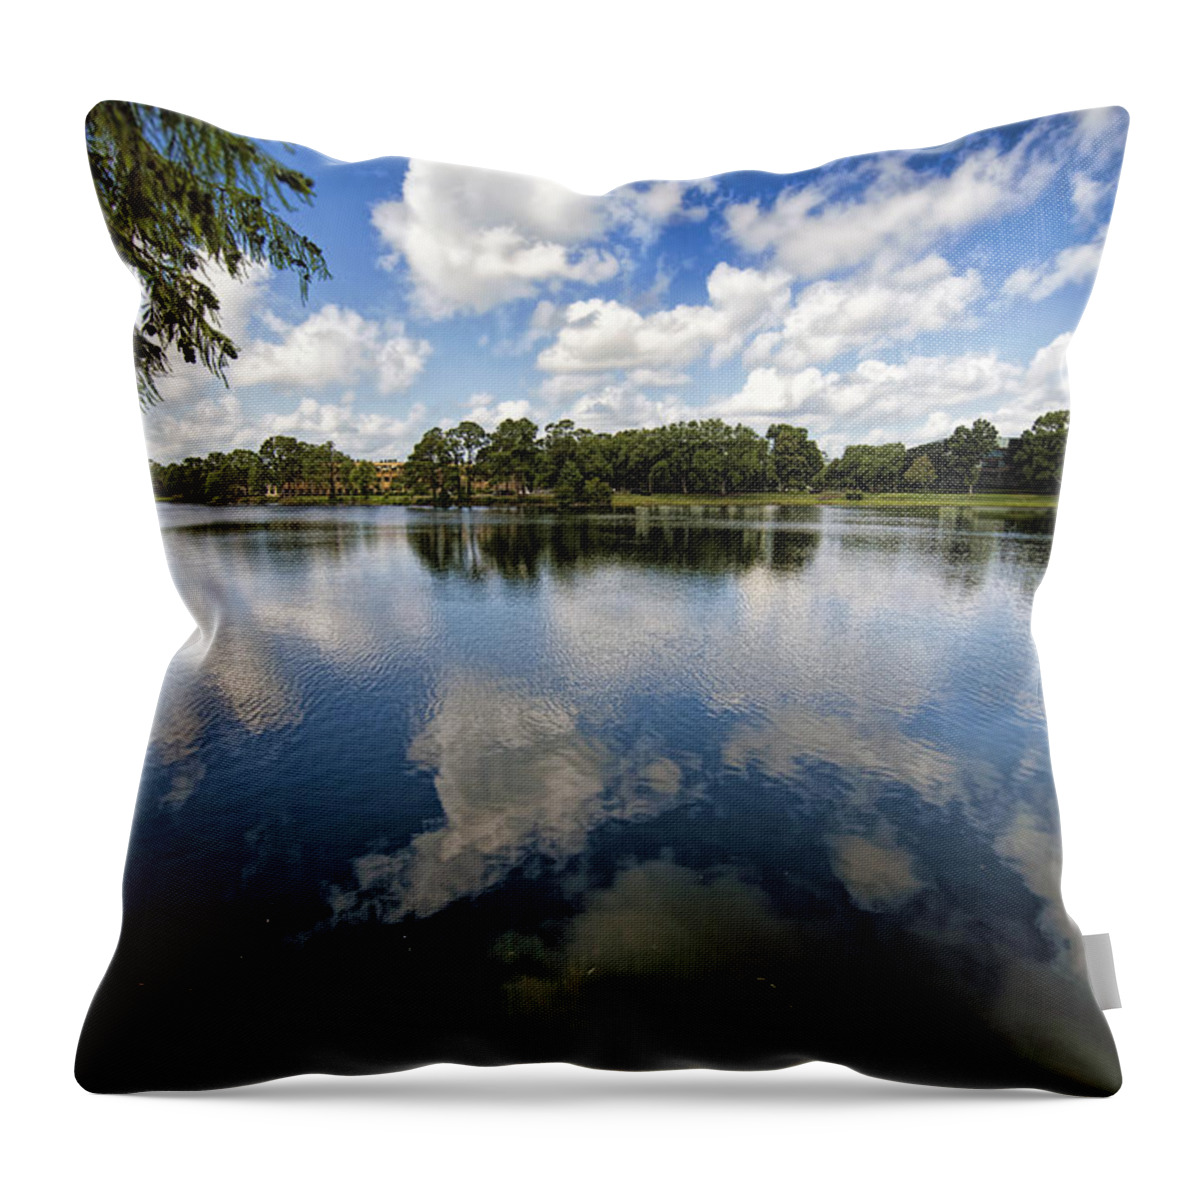 Lake Throw Pillow featuring the photograph Summer Skies by Anthony Baatz